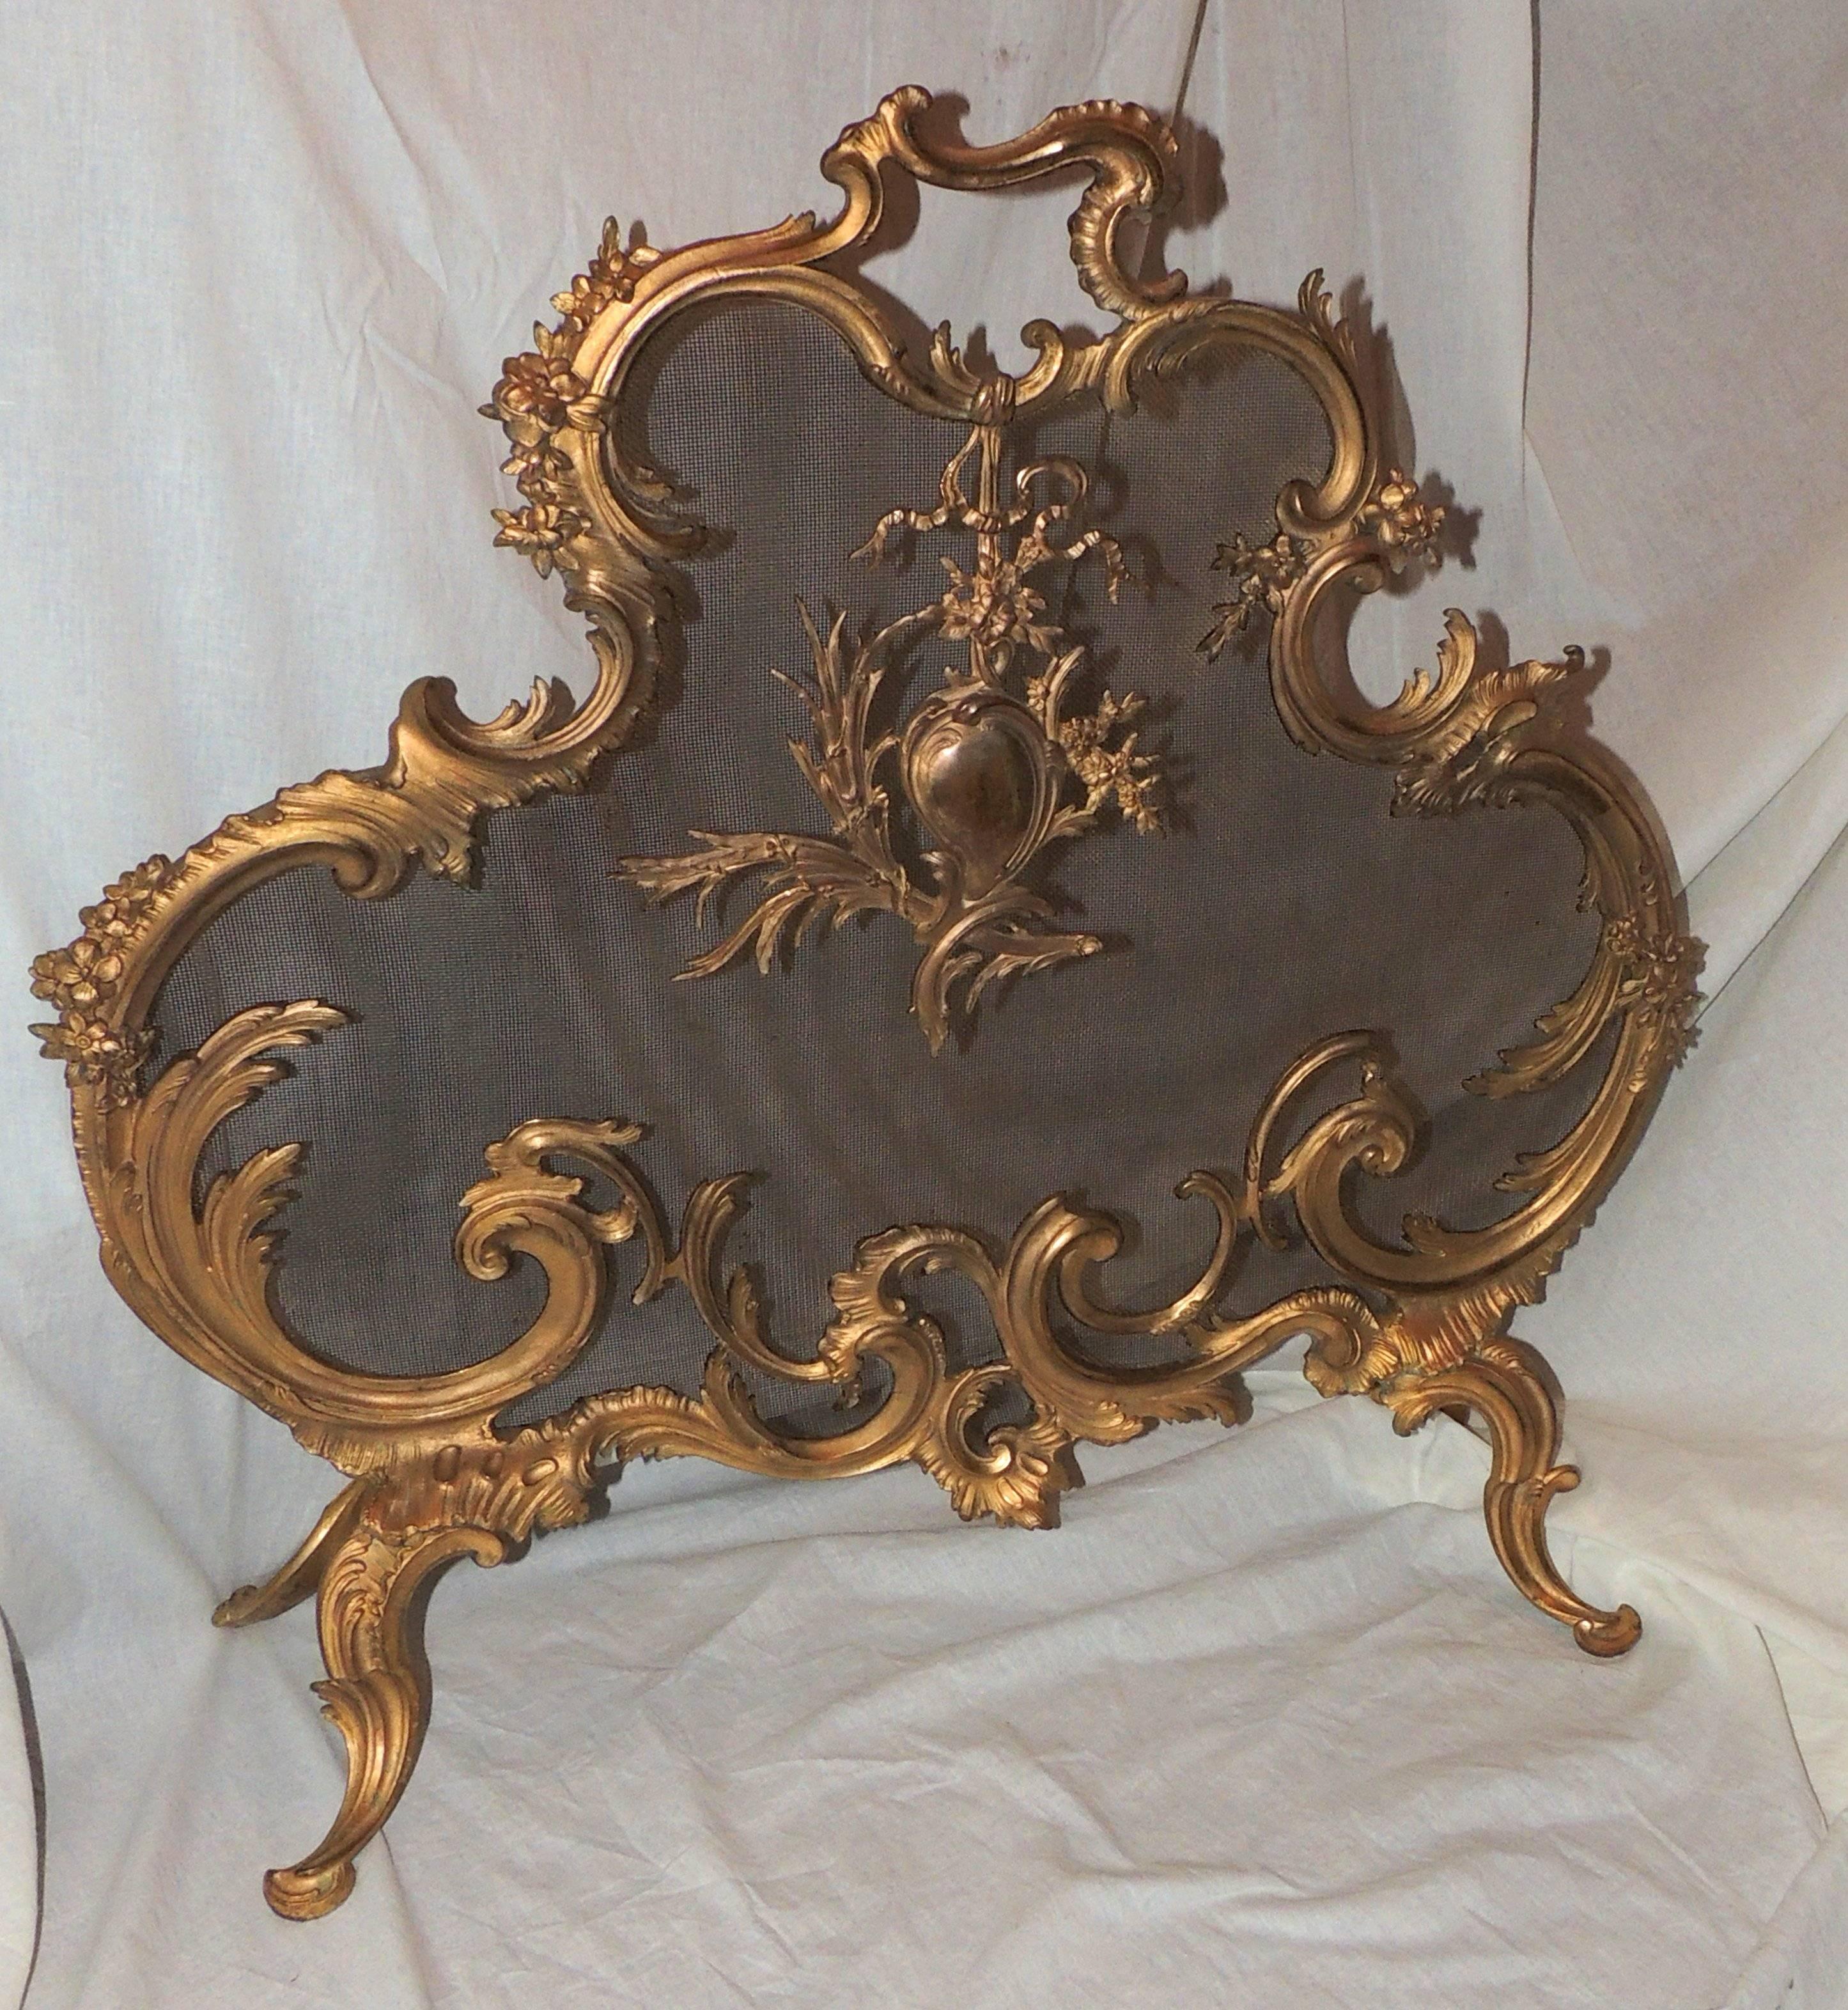 Wonderful French Rococo gilt bronze firescreen with center ribbon and filigree medallion.


Measures: 30" H x 32" W x 10" D.